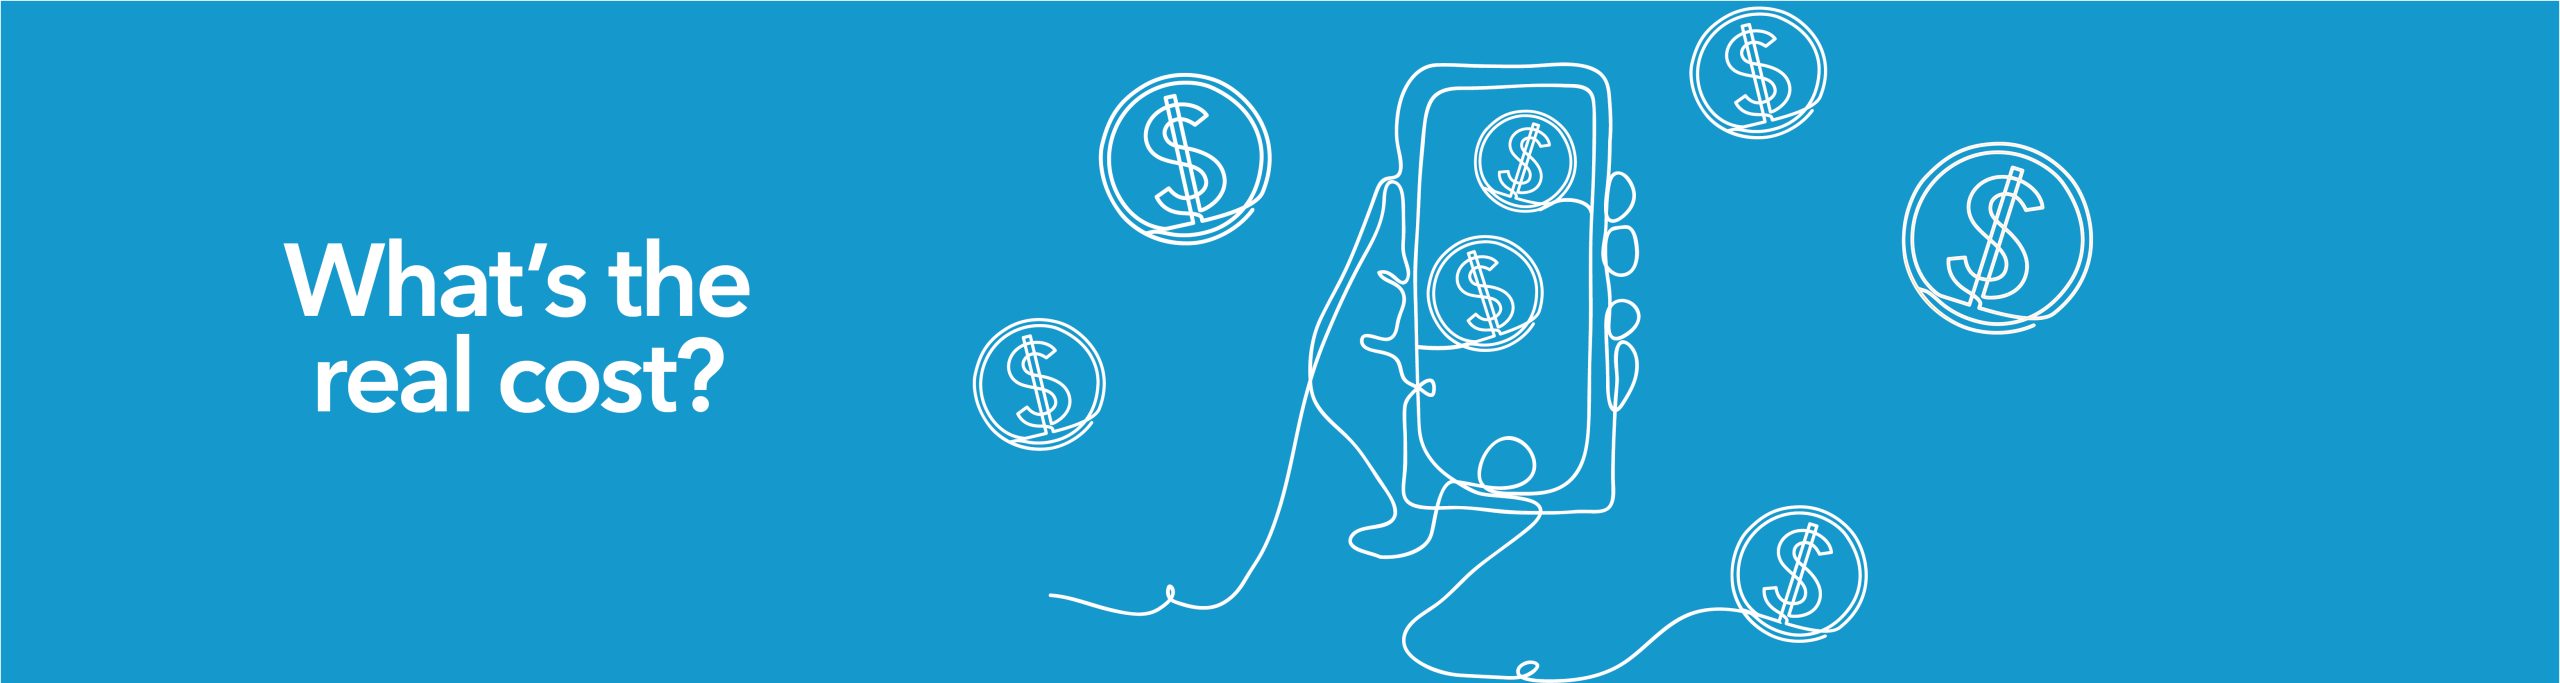 illustration with the words 'What's the real cost? and a picture of a hand holding a smartphone with dollar signs on it.